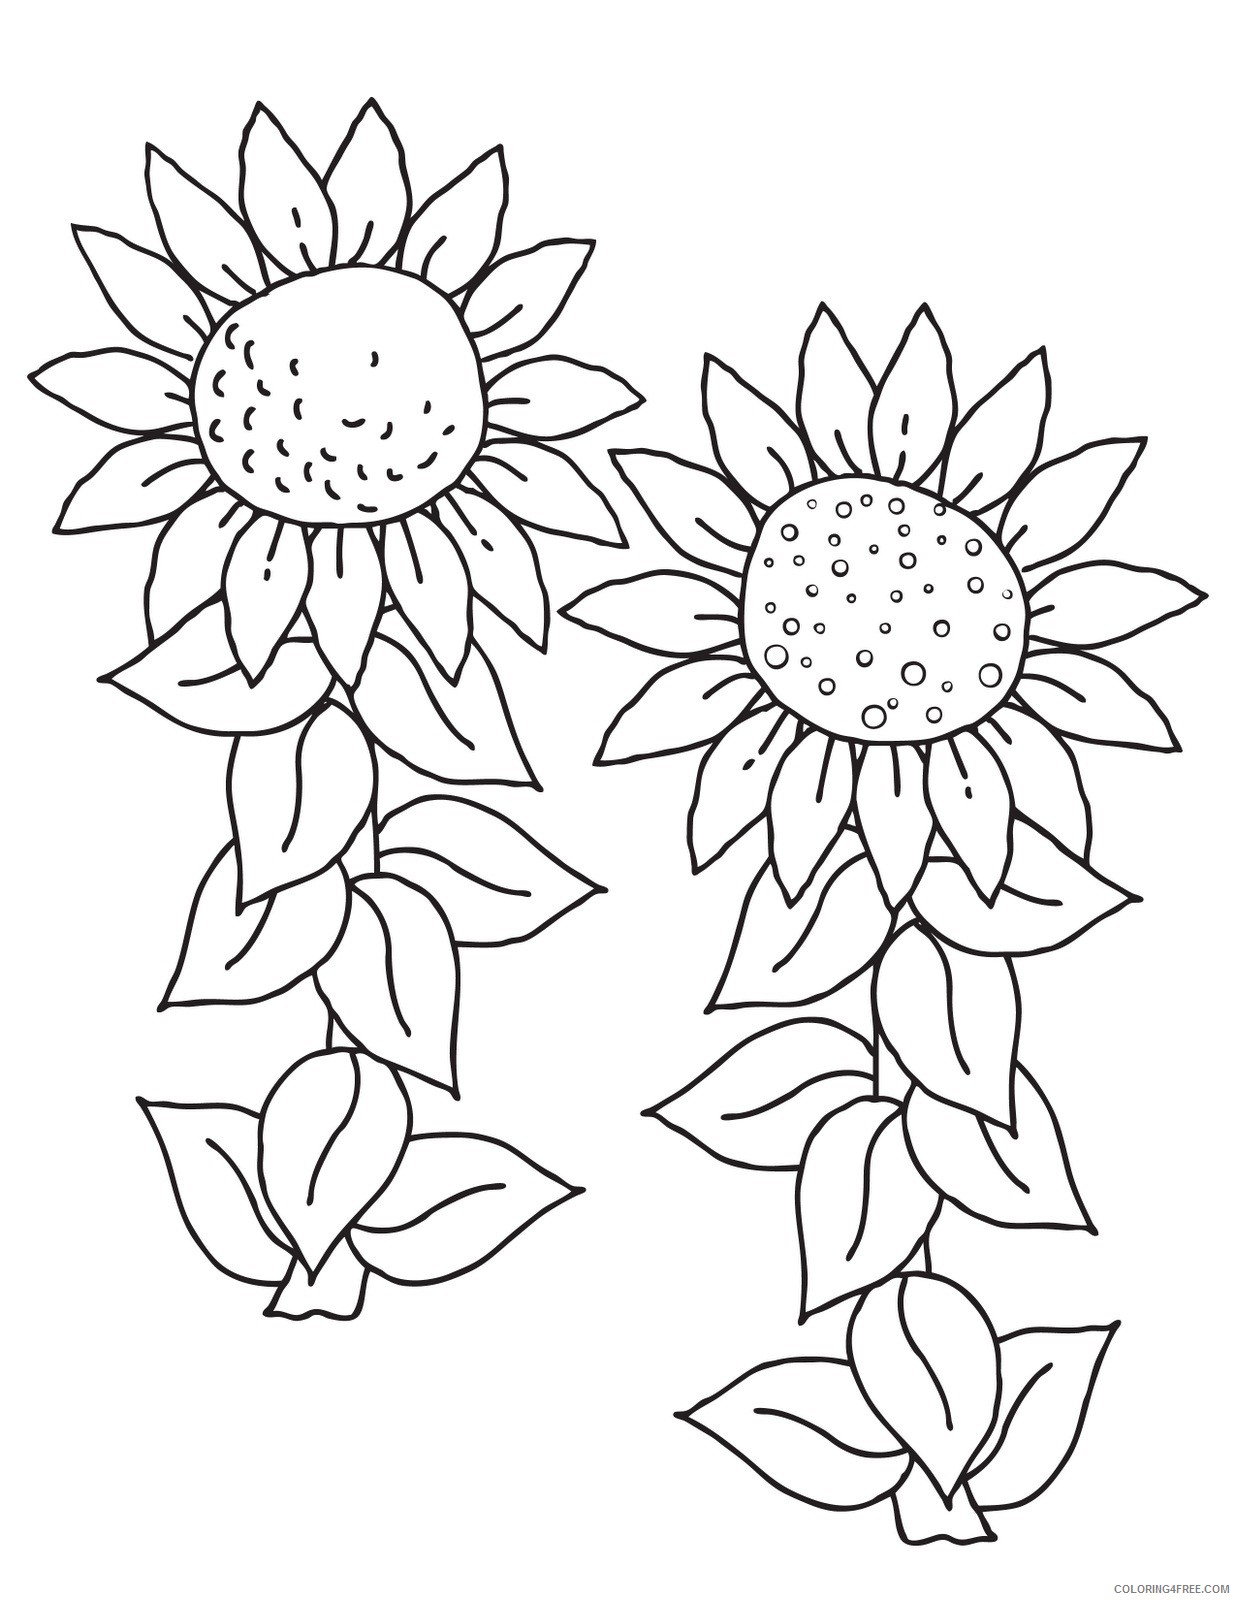 sunflower coloring pages two sunflowers Coloring4free